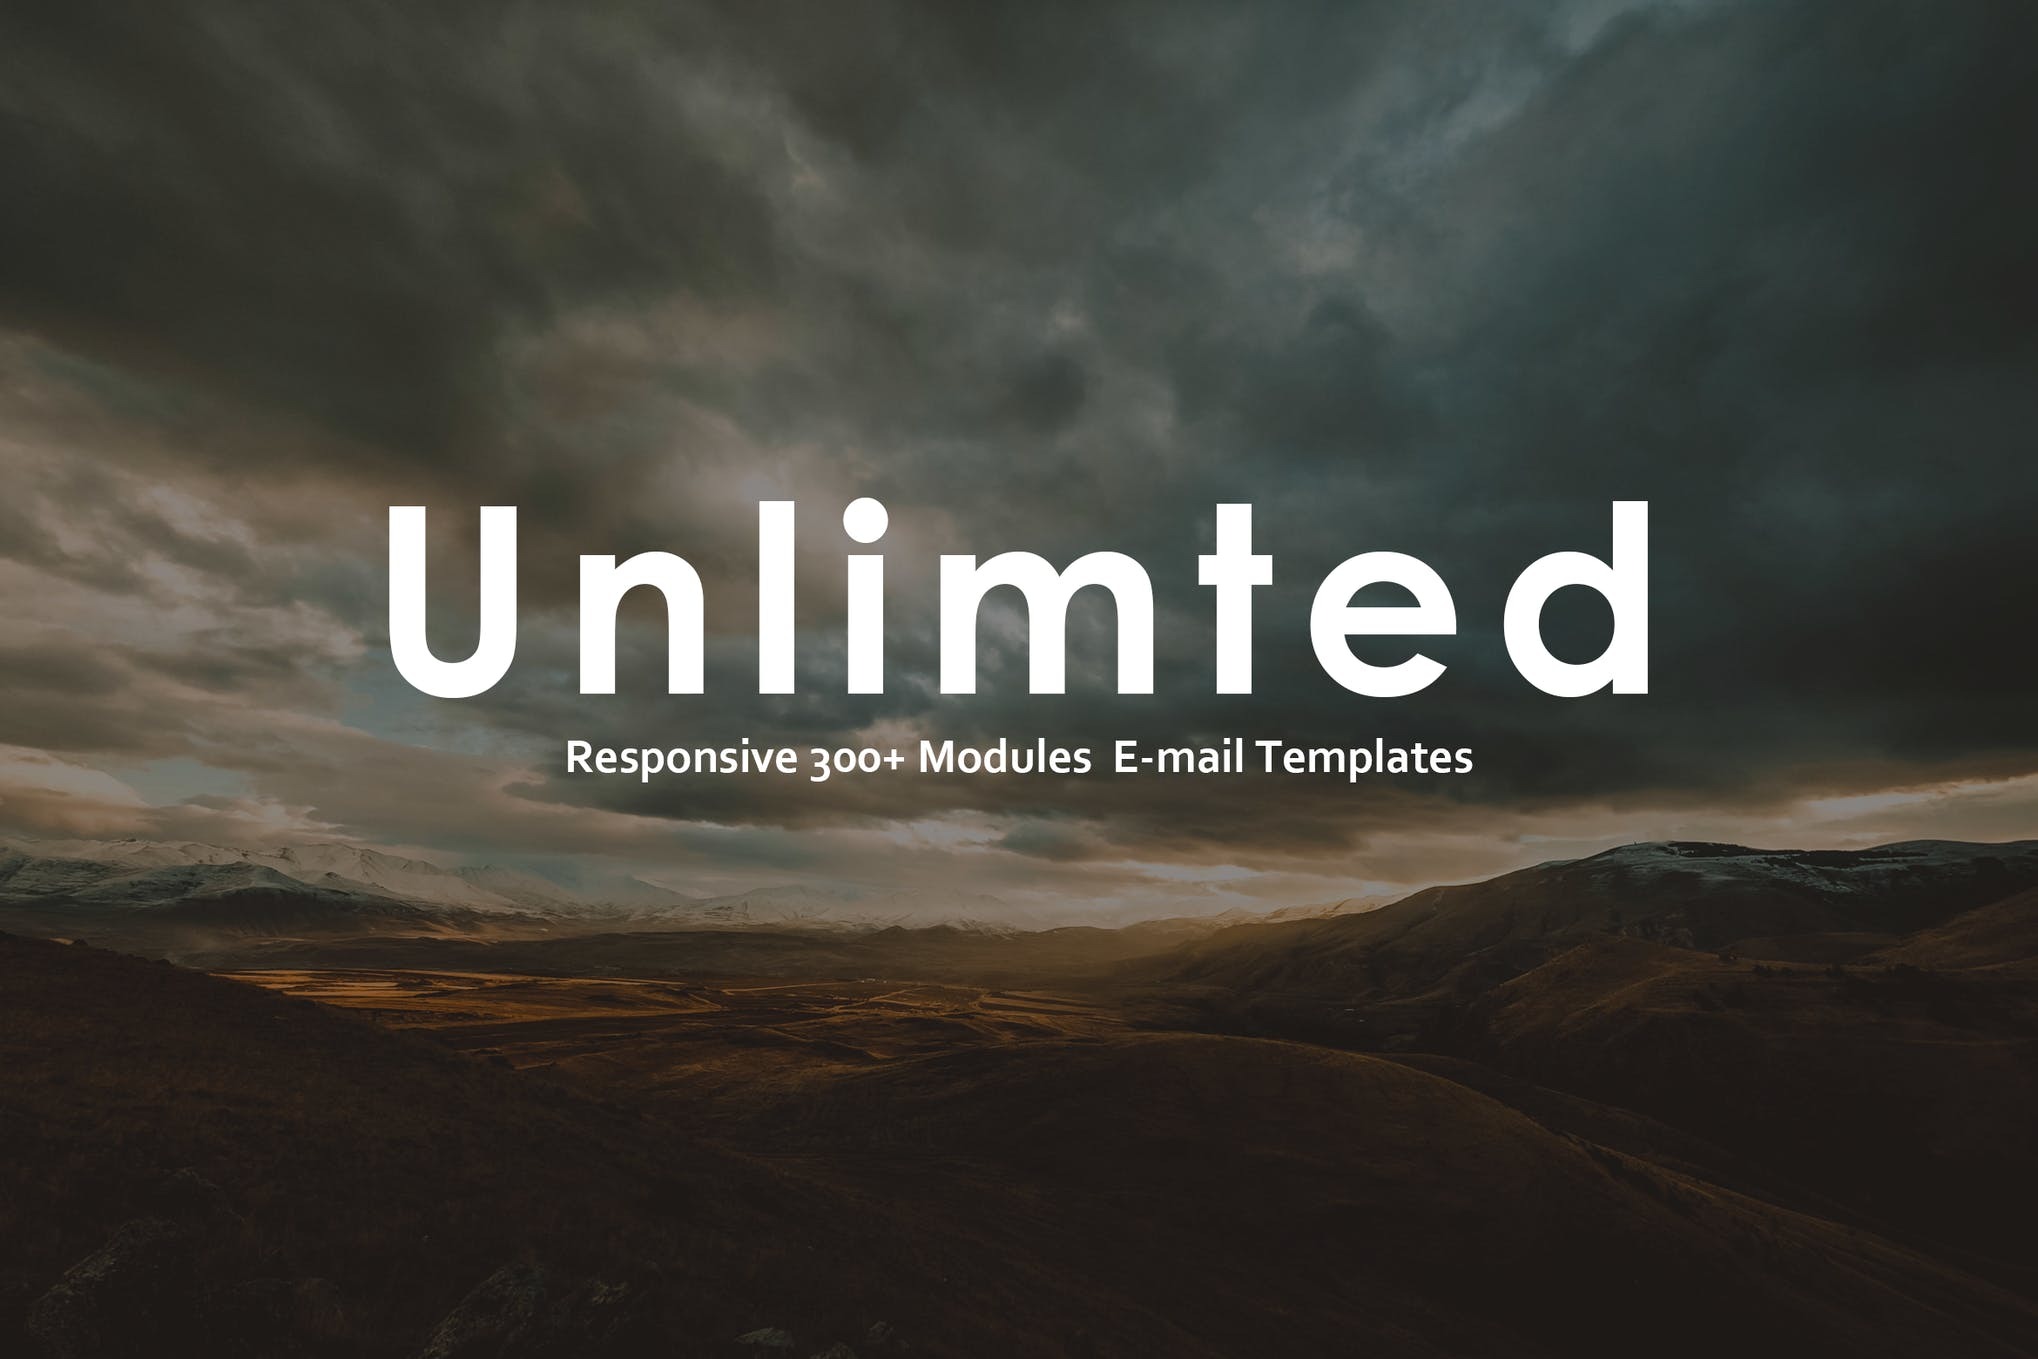 Unlimted - Modules E-mail Template